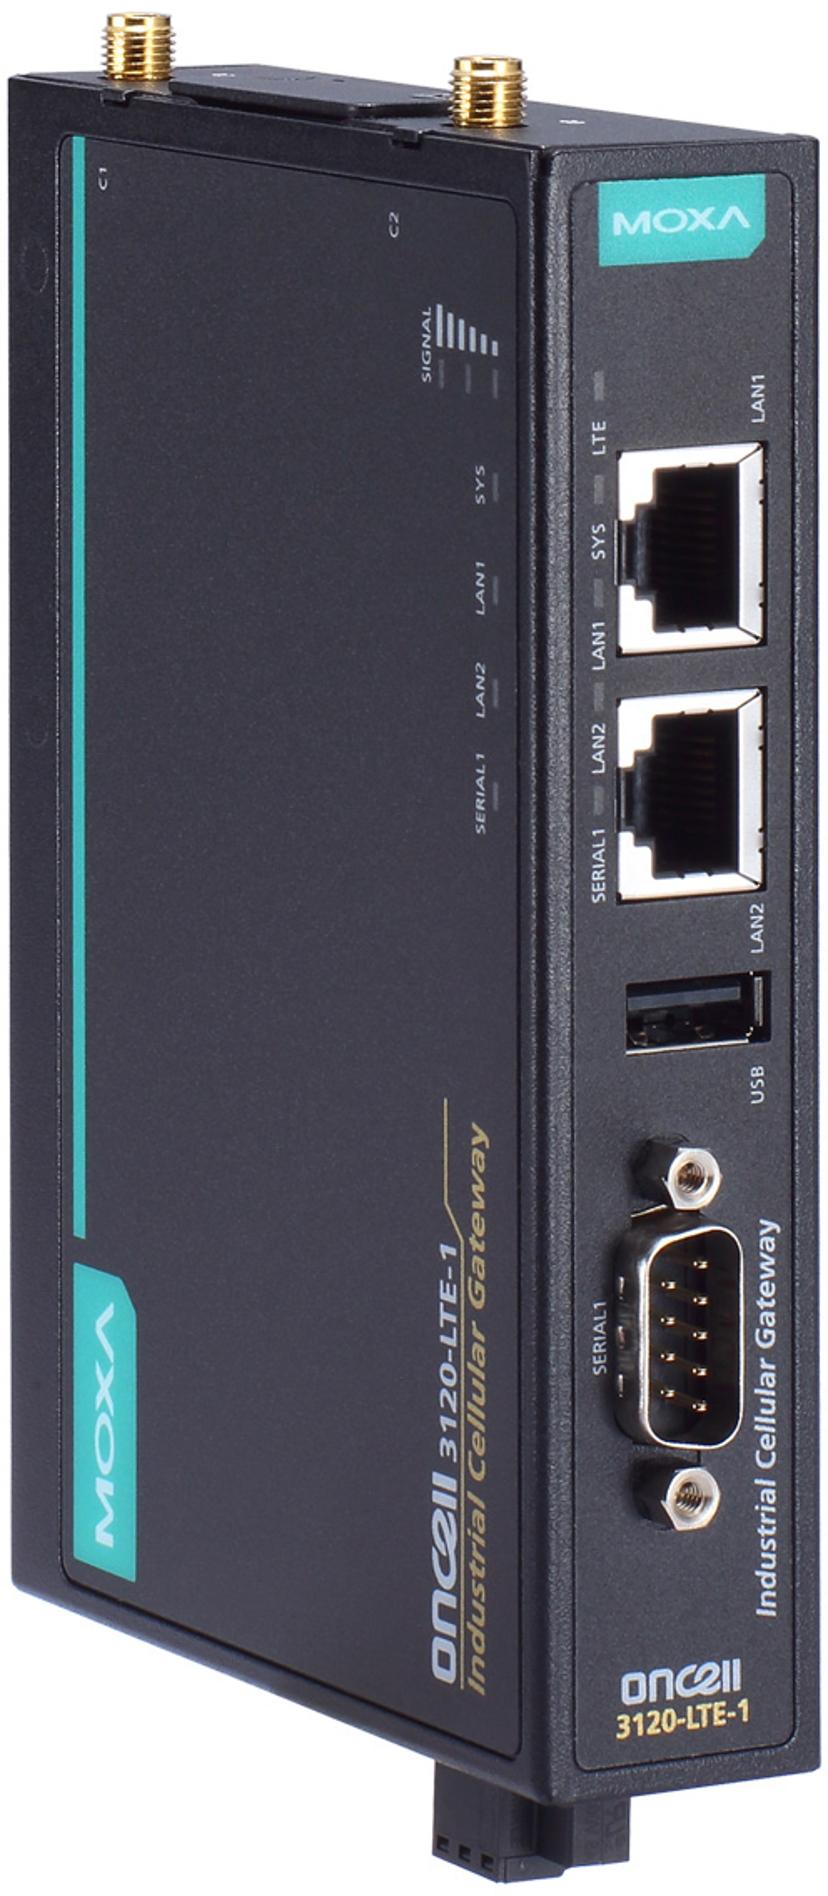 Moxa OnCell 3120-LTE-1 Industriell LTE Gateway